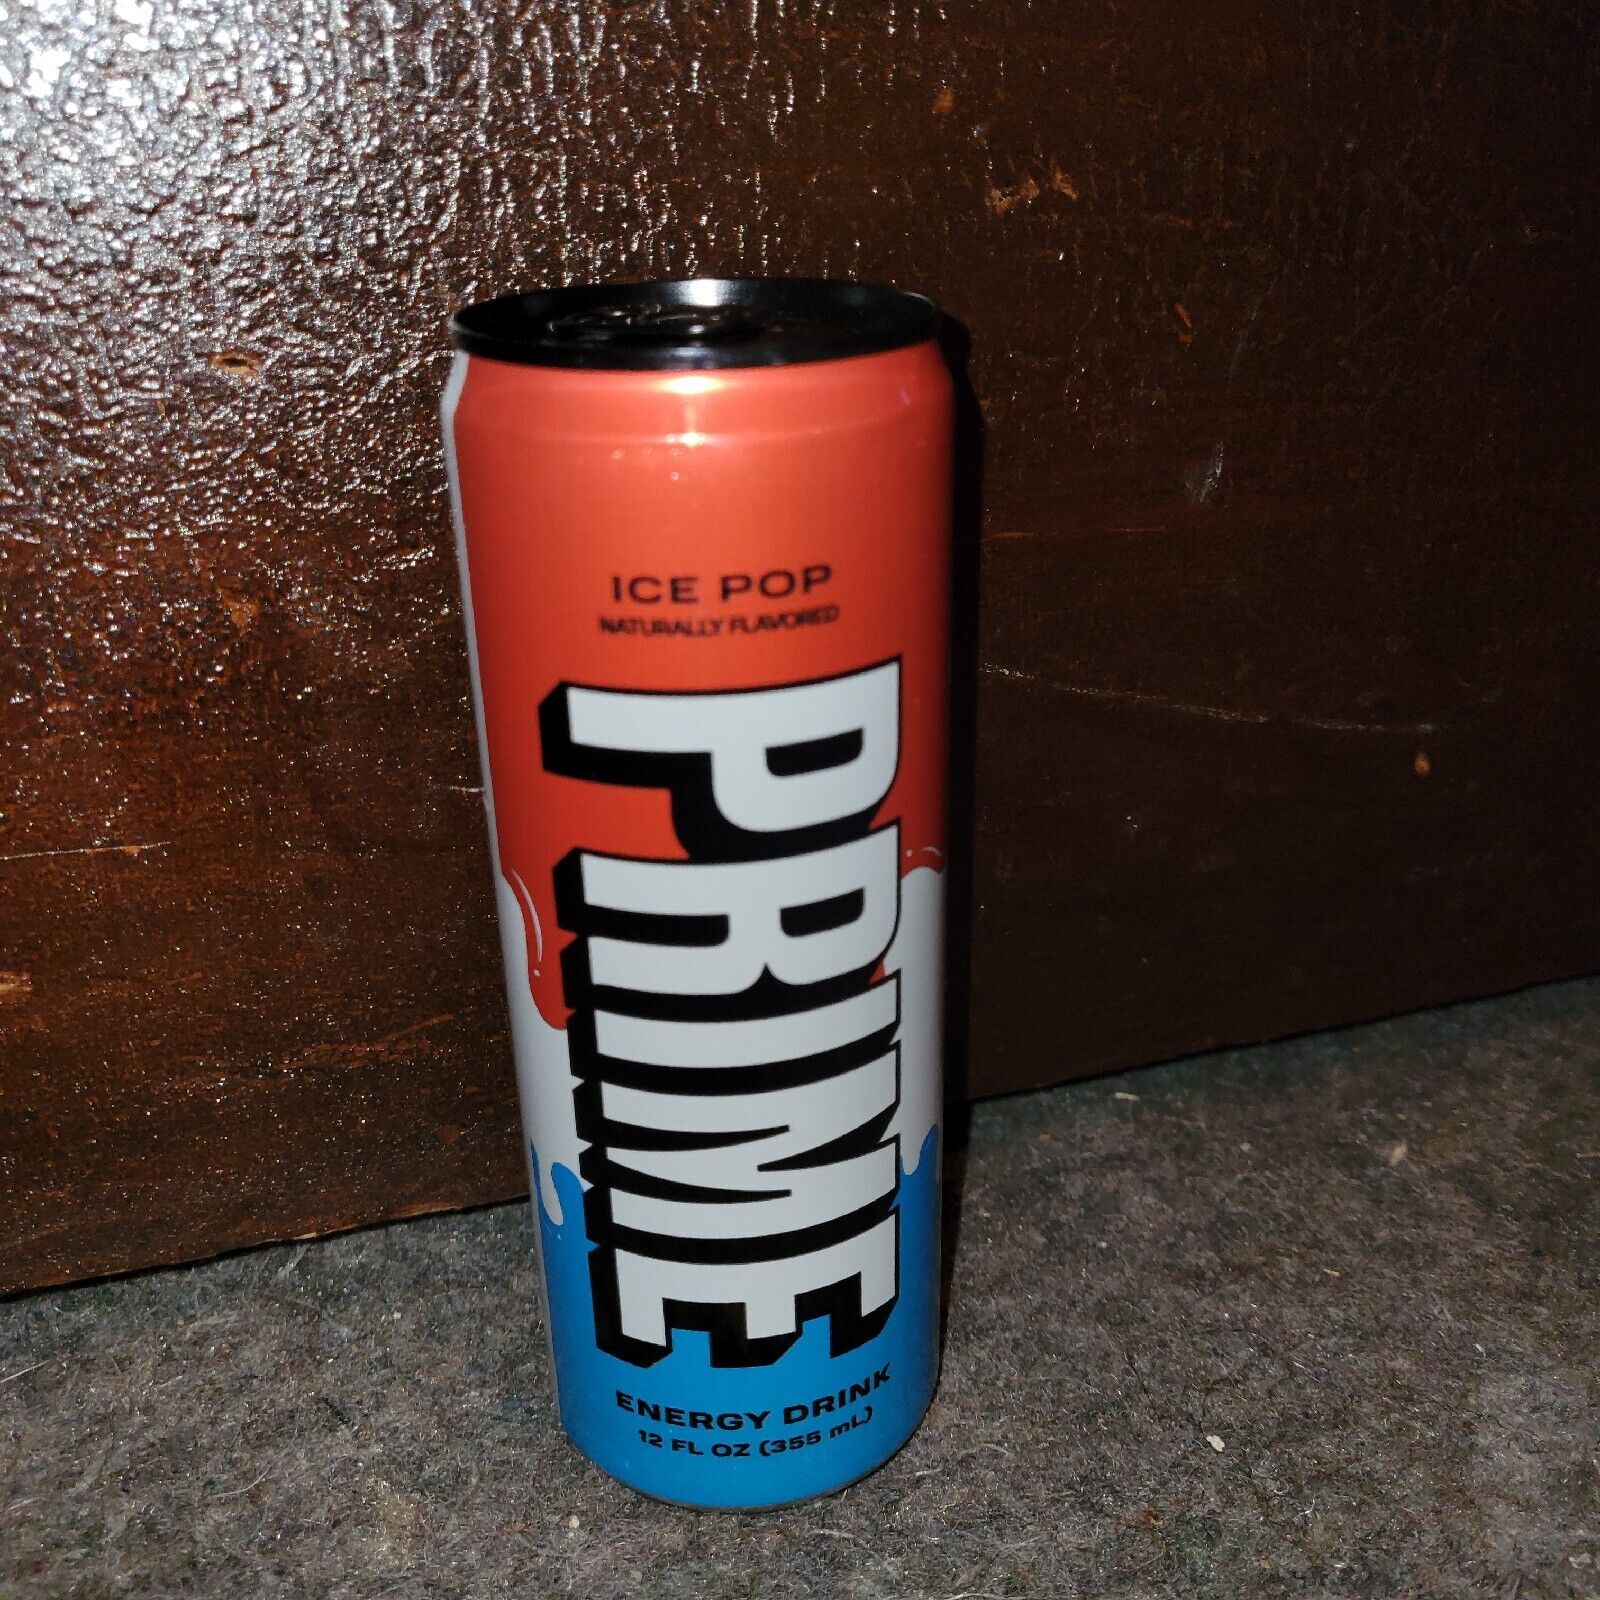 Prime ENERGY DRINK ICE POP SOLD OUT FLAVOR 12 oz CAN LIMITED SUPPLY